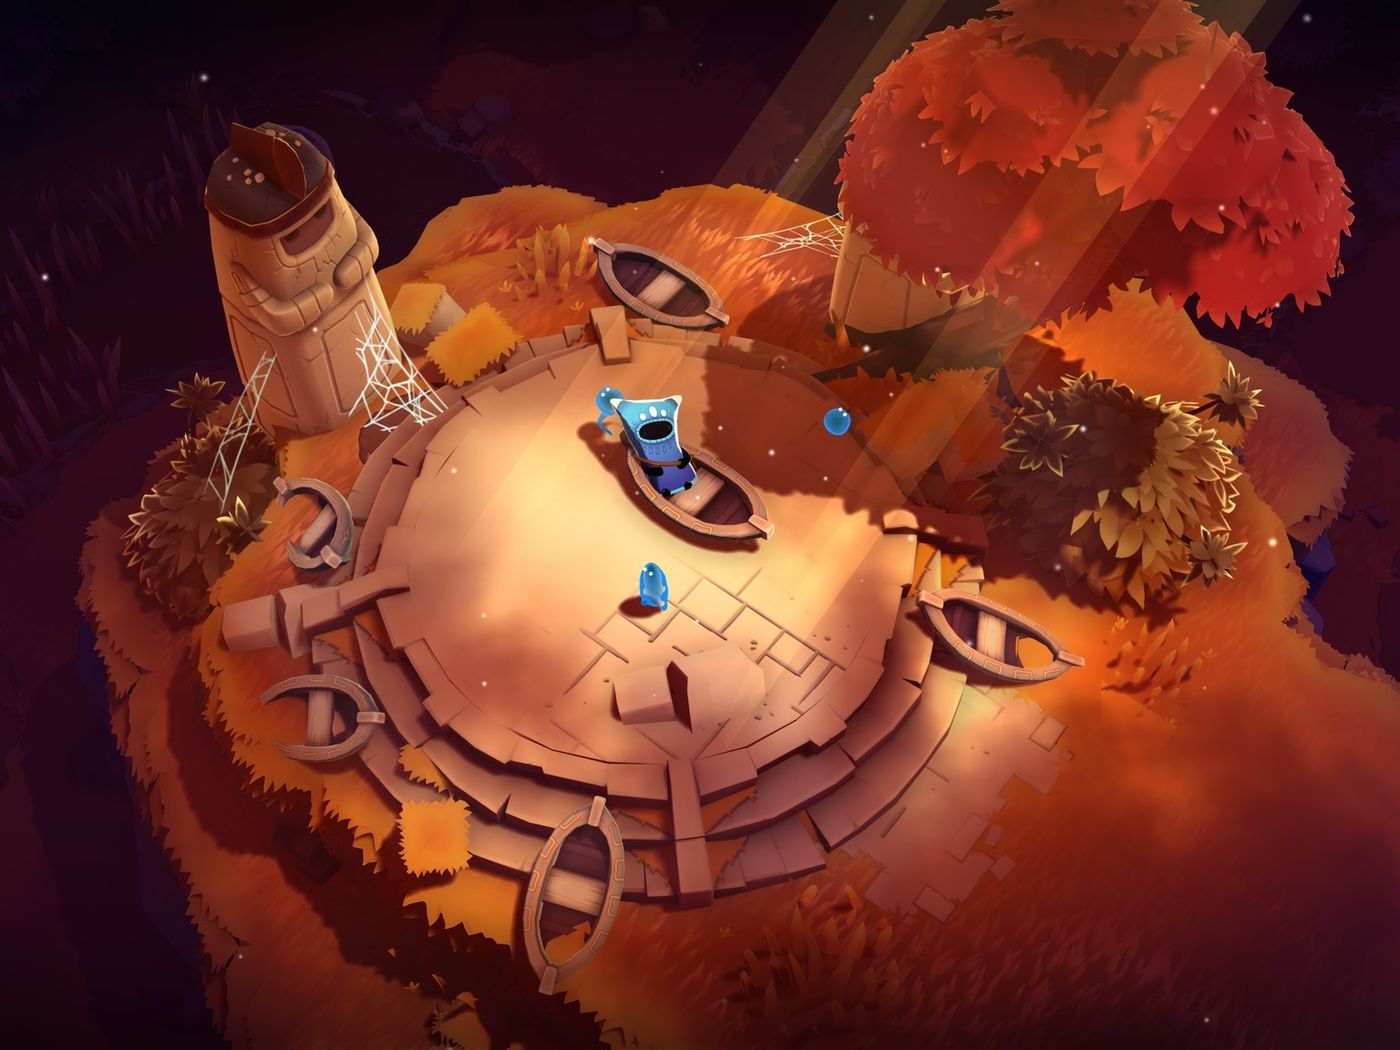 The Last Campfire is a surprise new adventure from Hello Games